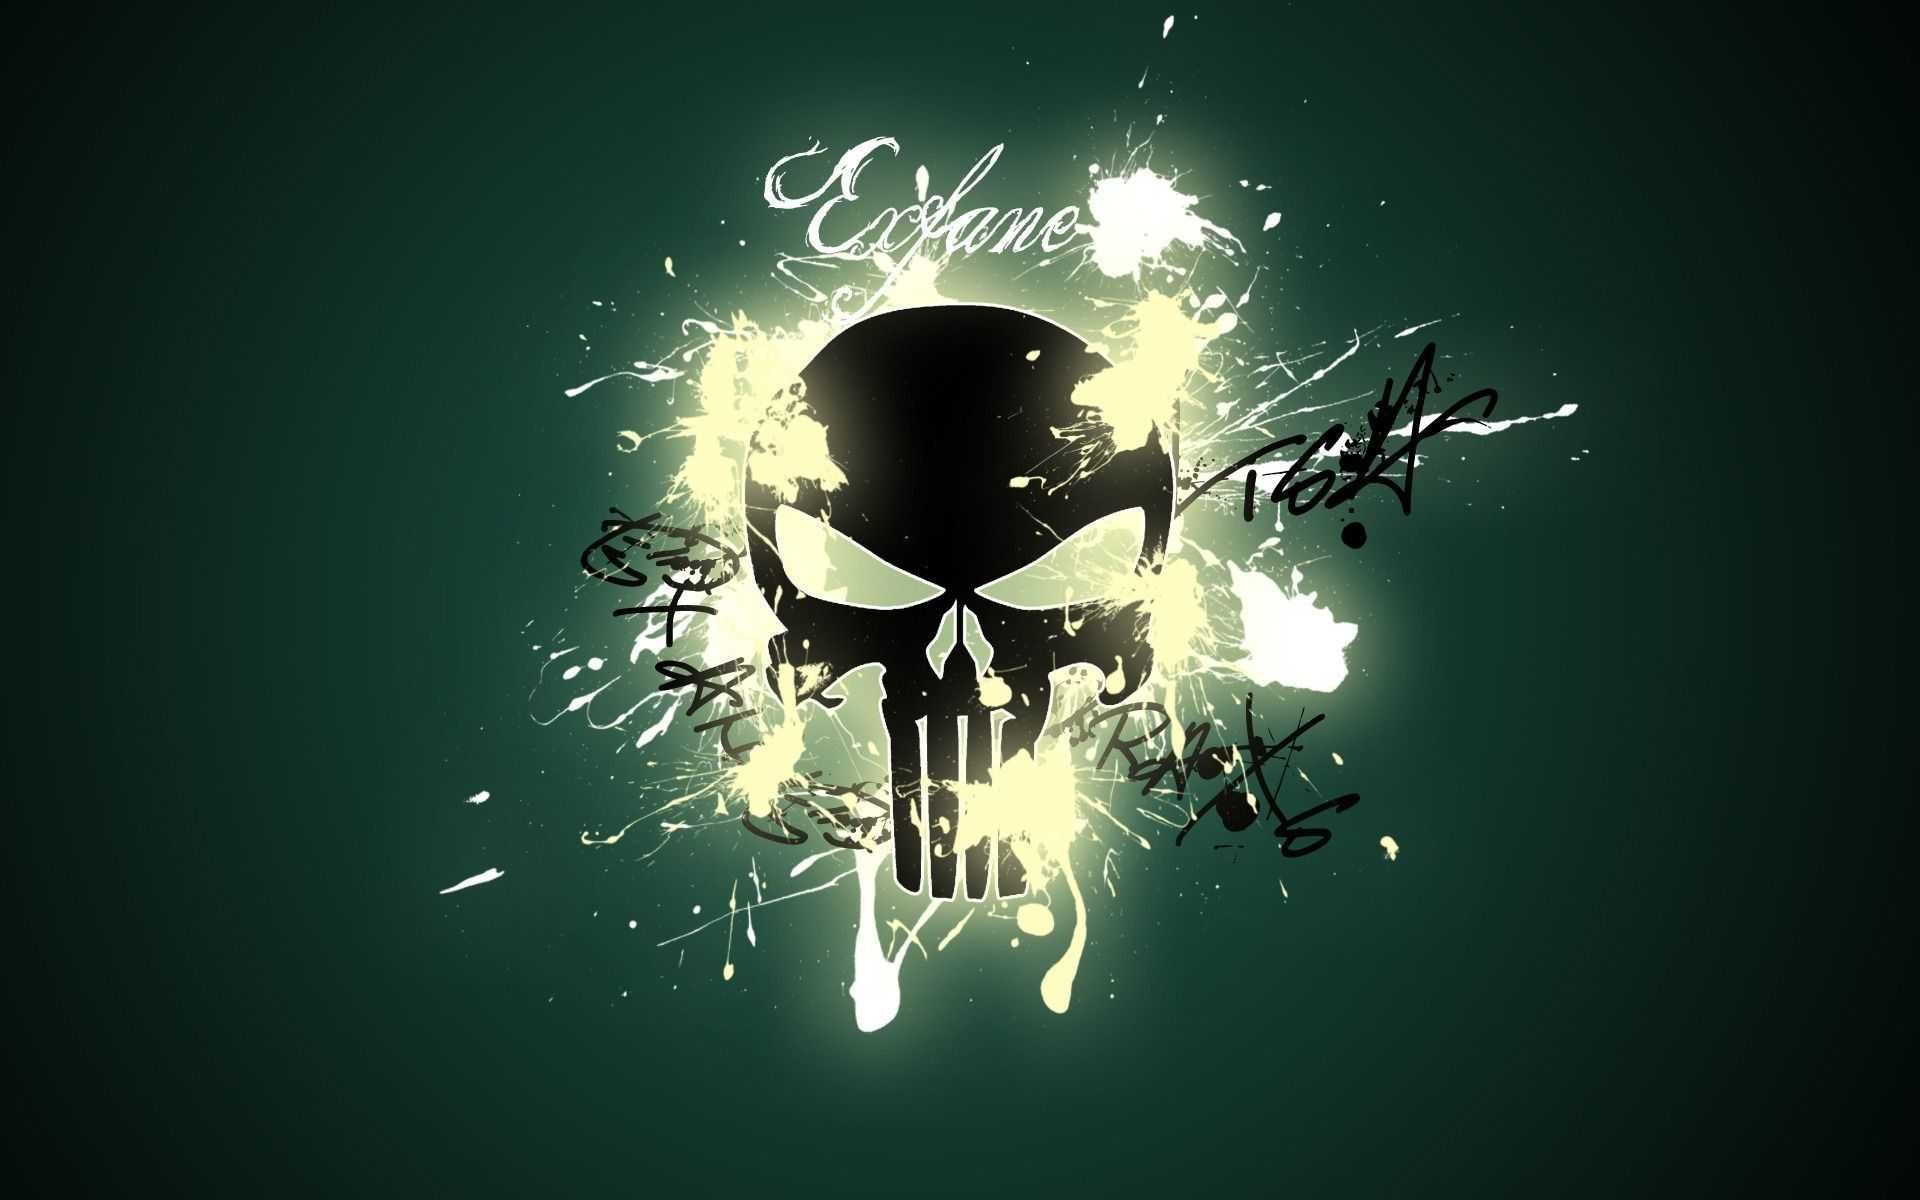 1920x1200 Punisher Skull Wallpapers Discover more Punisher, Punisher Logo, Punisher Skull wallpap&acirc;&#128;&brvbar; | Skull wallpaper, Cool wallpapers backgrounds, Cool backgrounds wallpapers